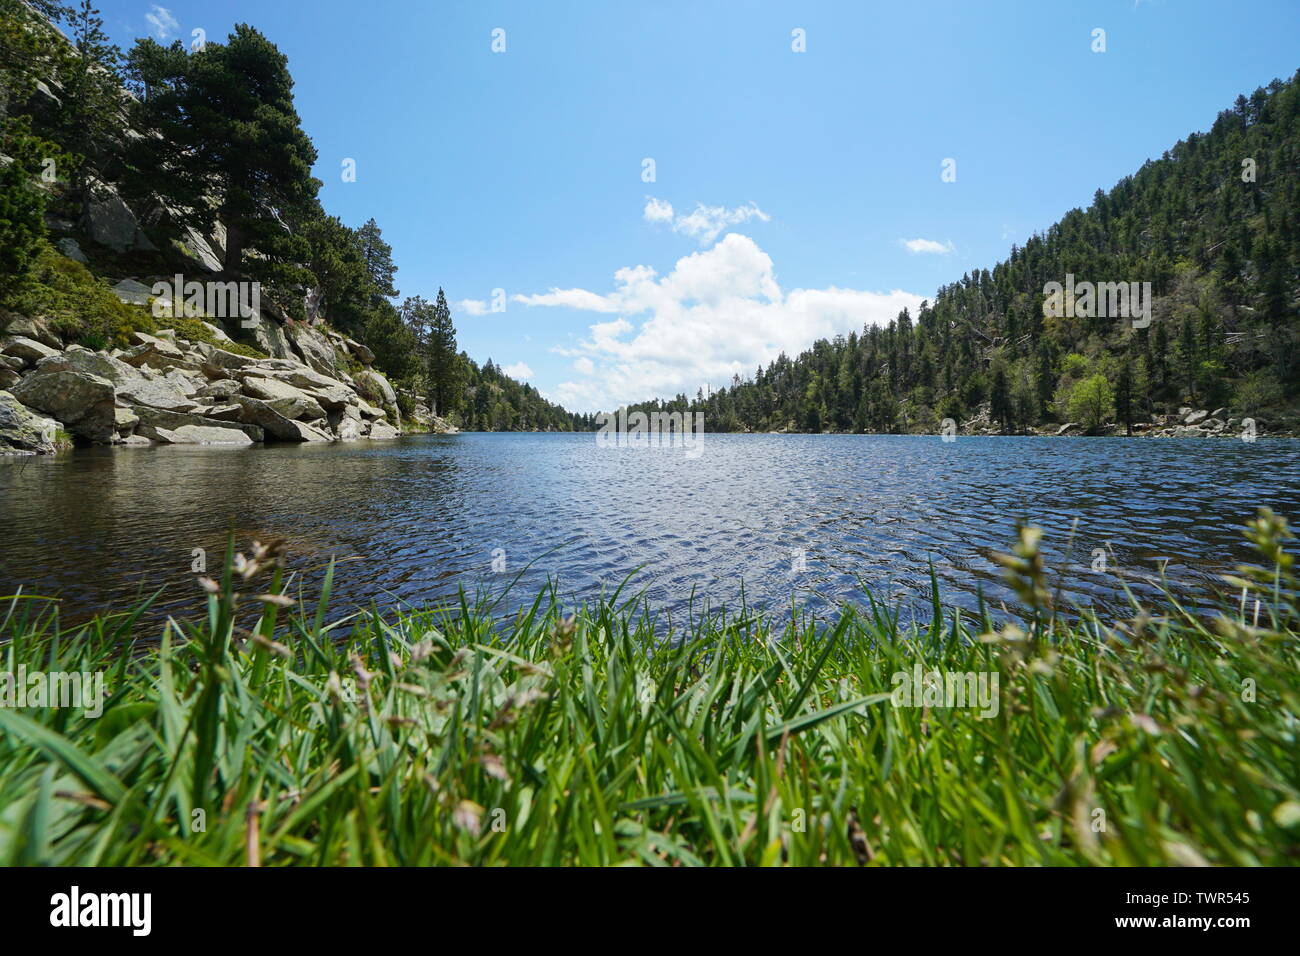 Lake in the mountain with grass in foreground, France, Pyrenees-Orientales, Estany Llarg, natural park of the Catalan Pyrenees, Occitanie Stock Photo